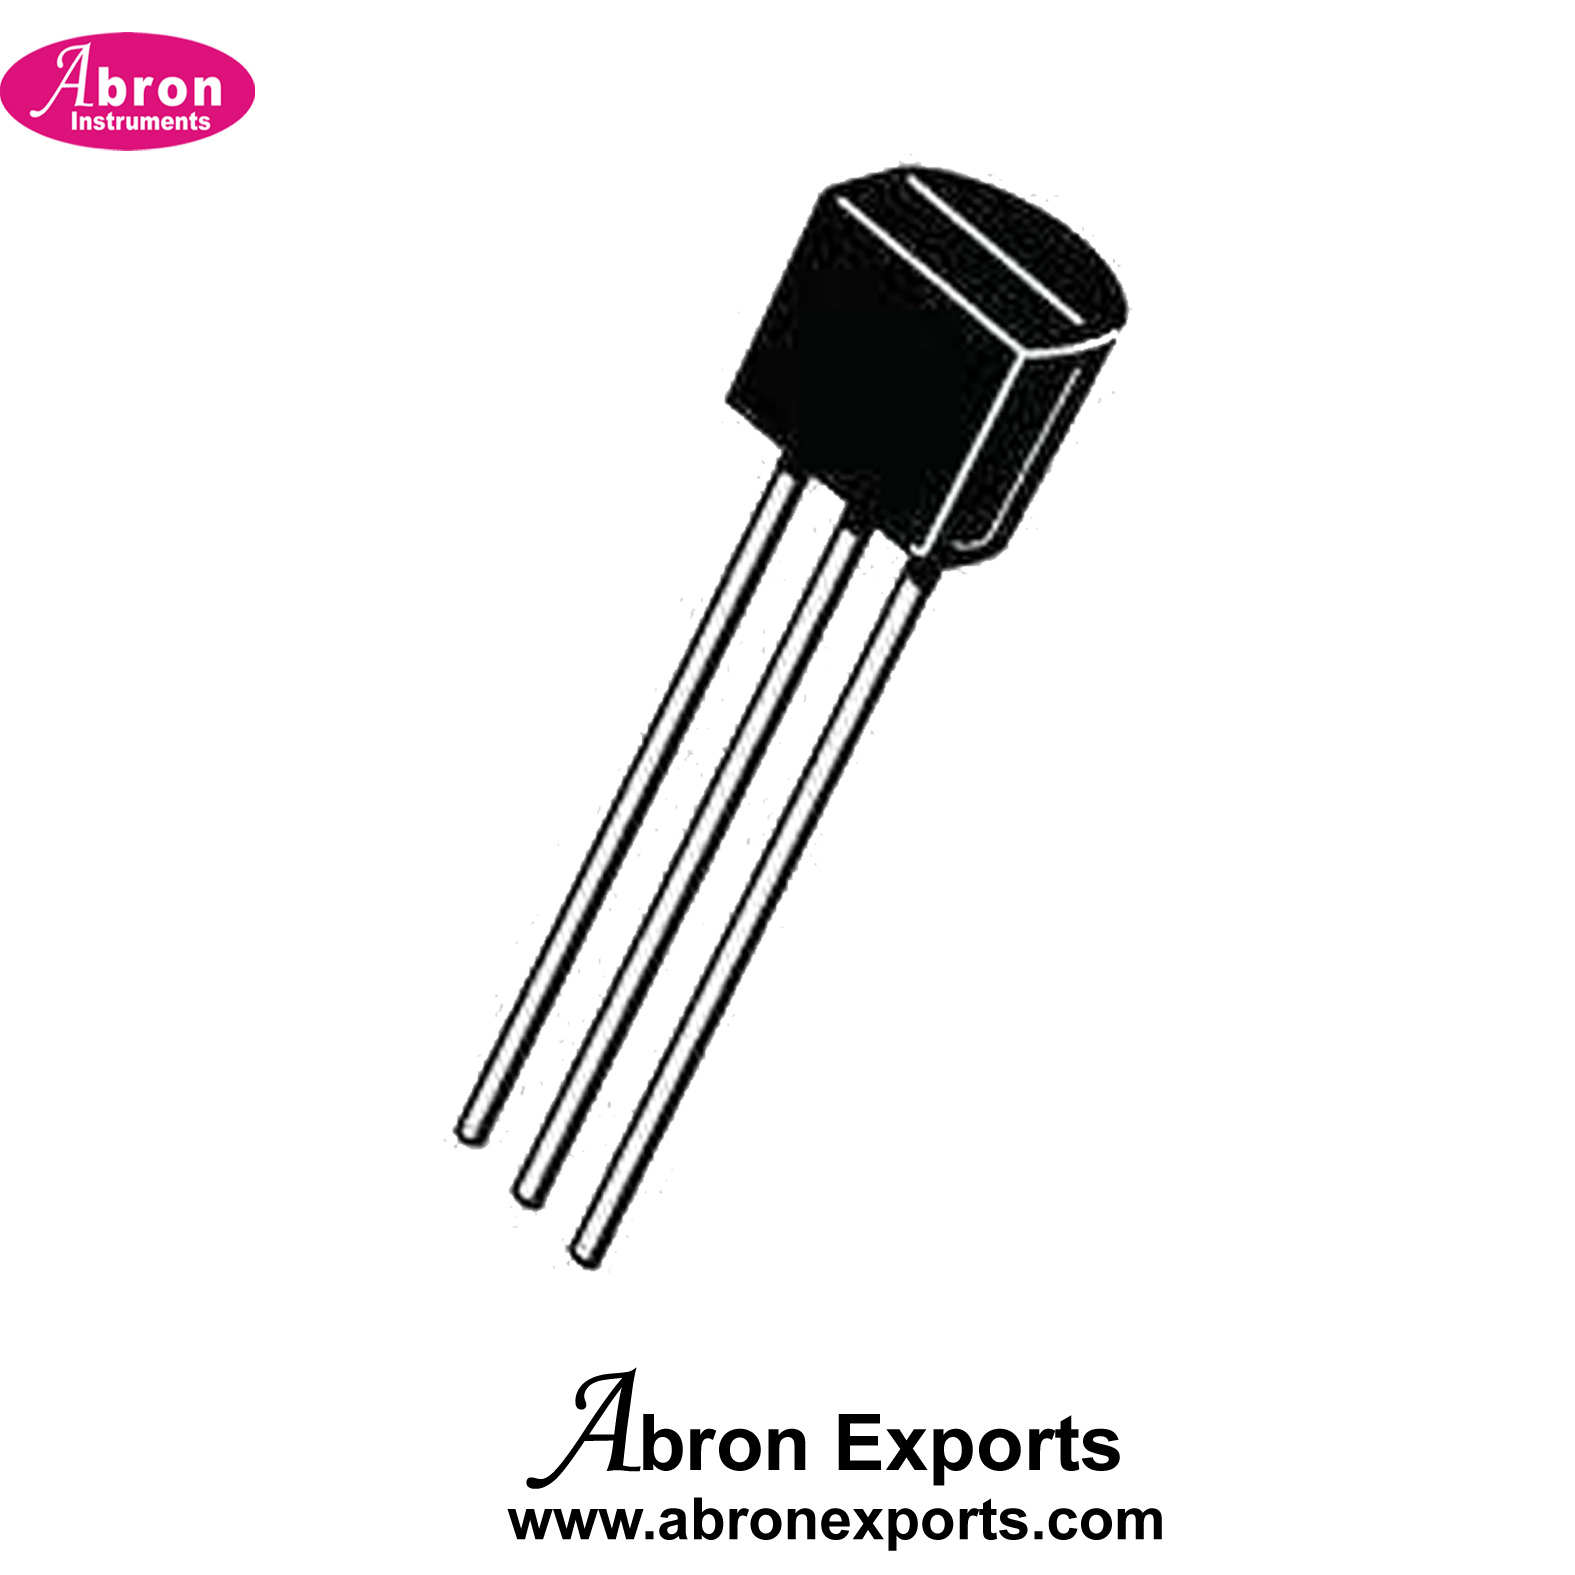 Electronic Component JFET 5459 or 5457 any 3 Legs 100pc Abron AE-1224JFET 